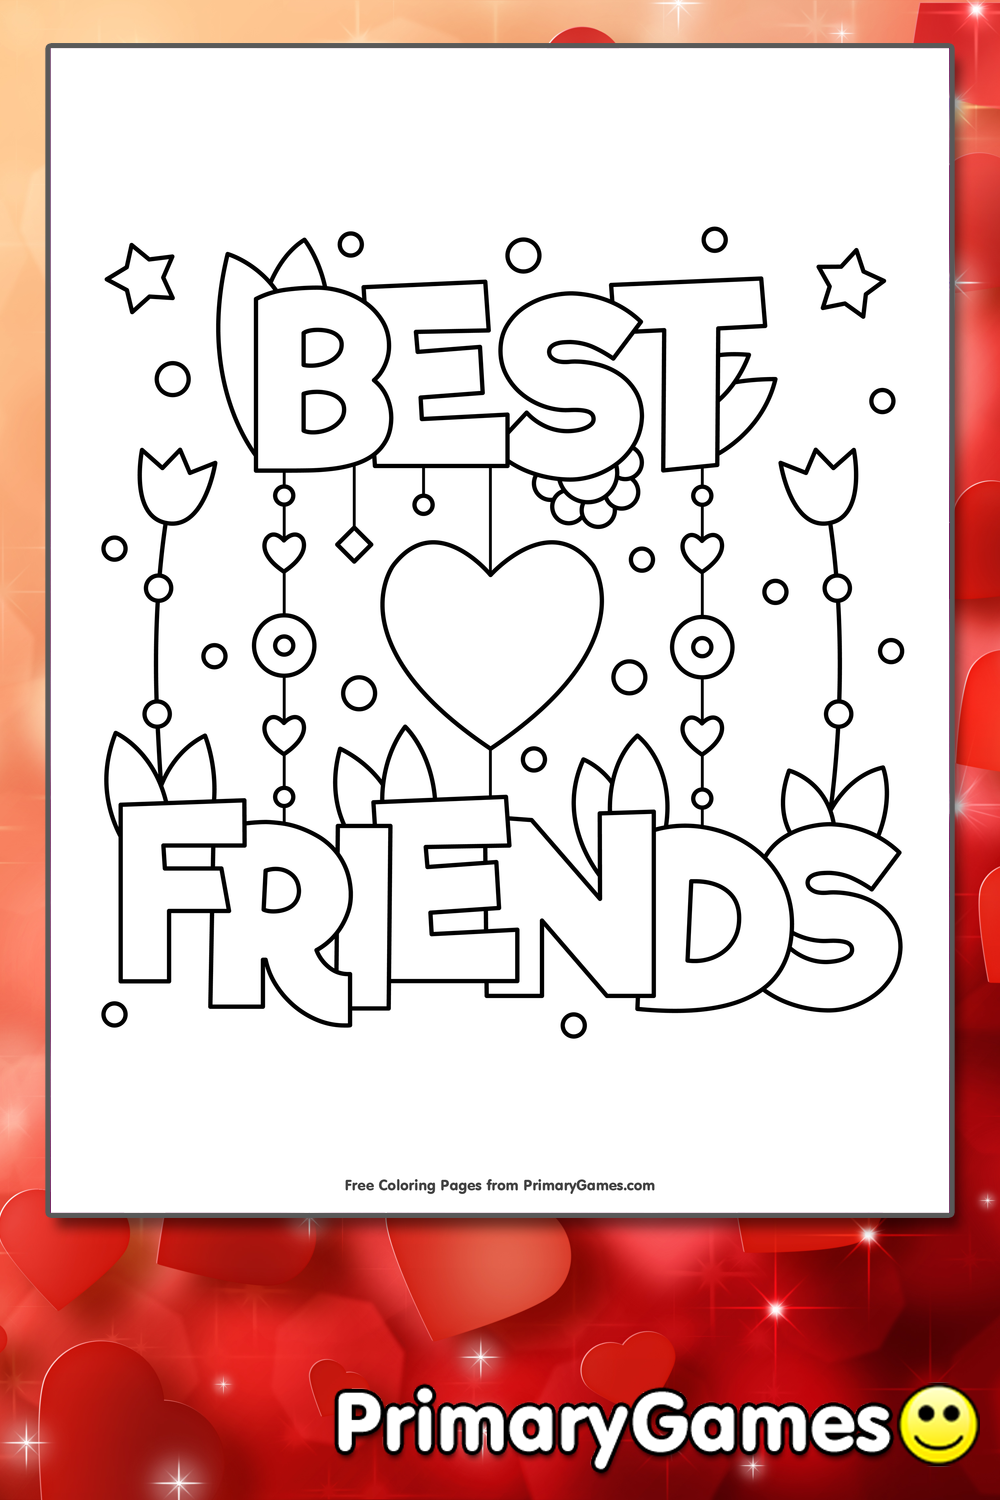 Best friends coloring page â free printable pdf from